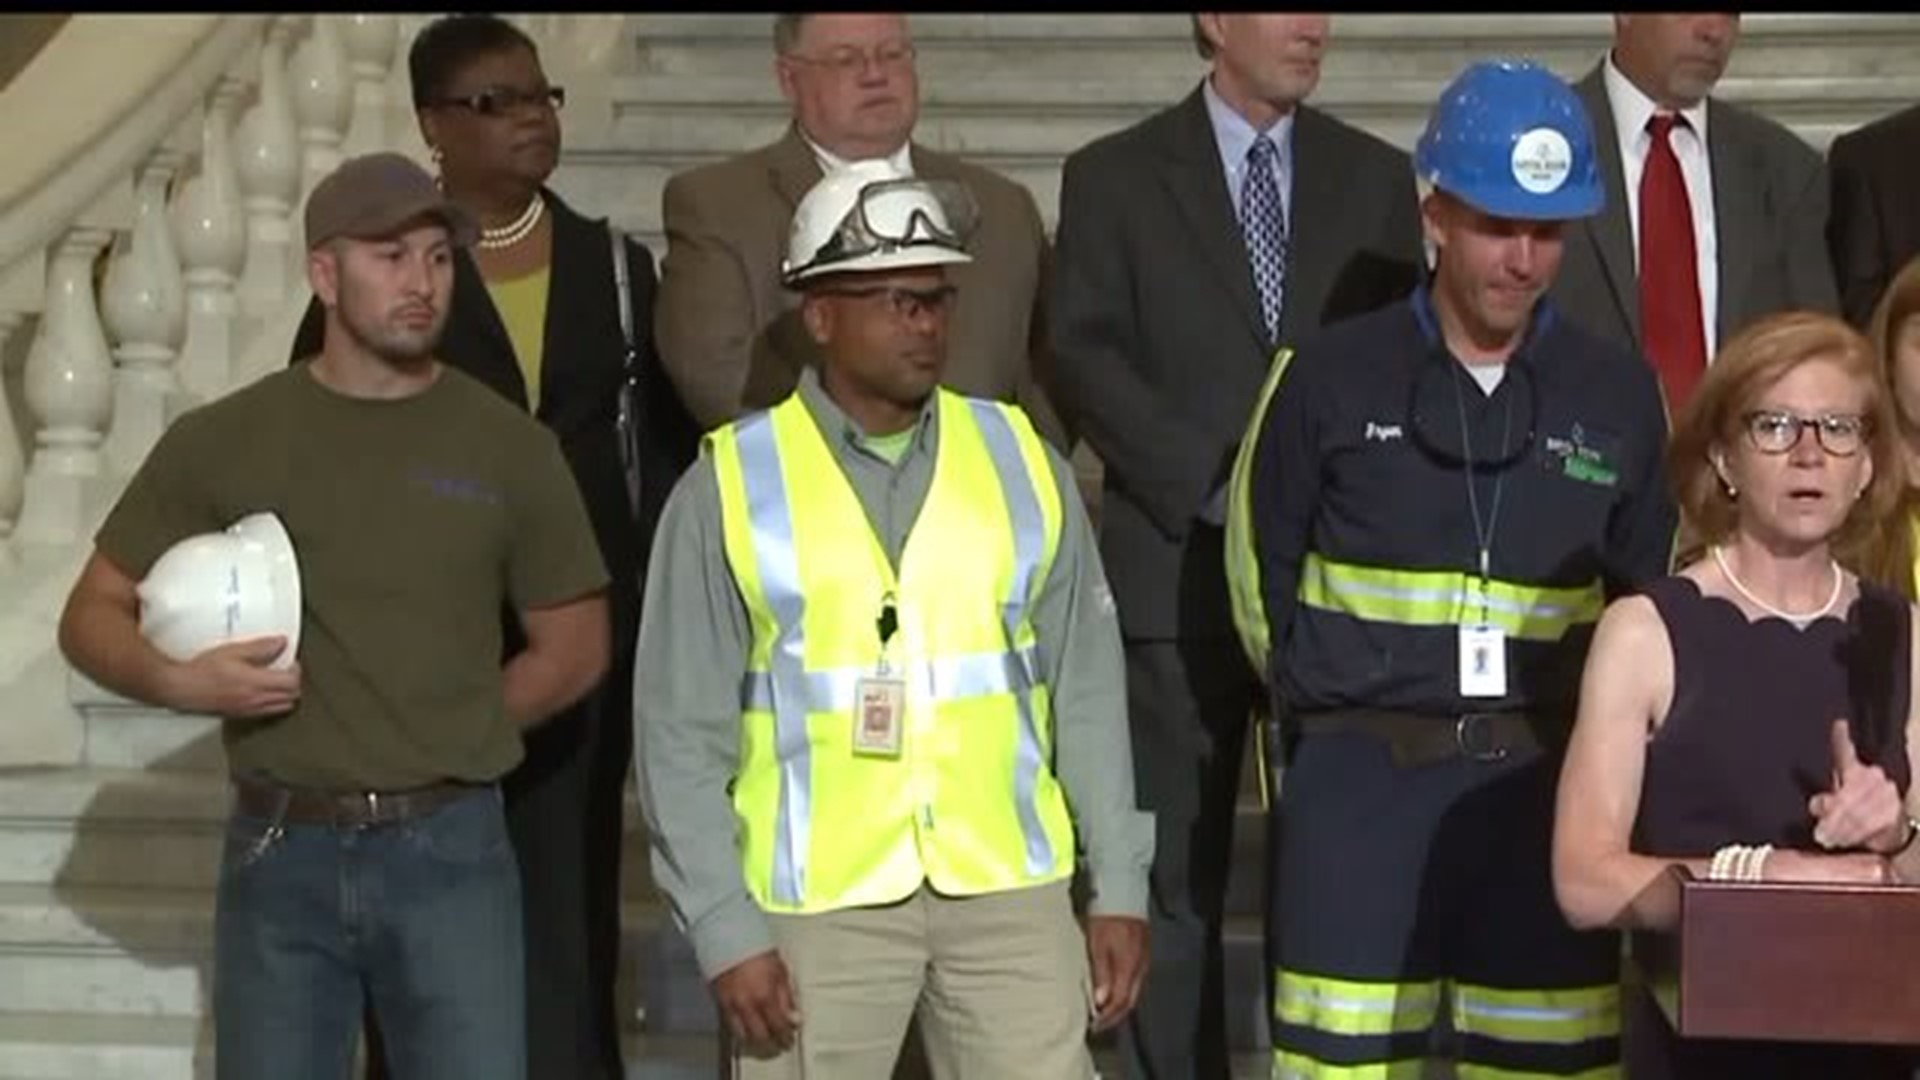 Imposters beware: Pennsylvania cracking down on utility worker posers